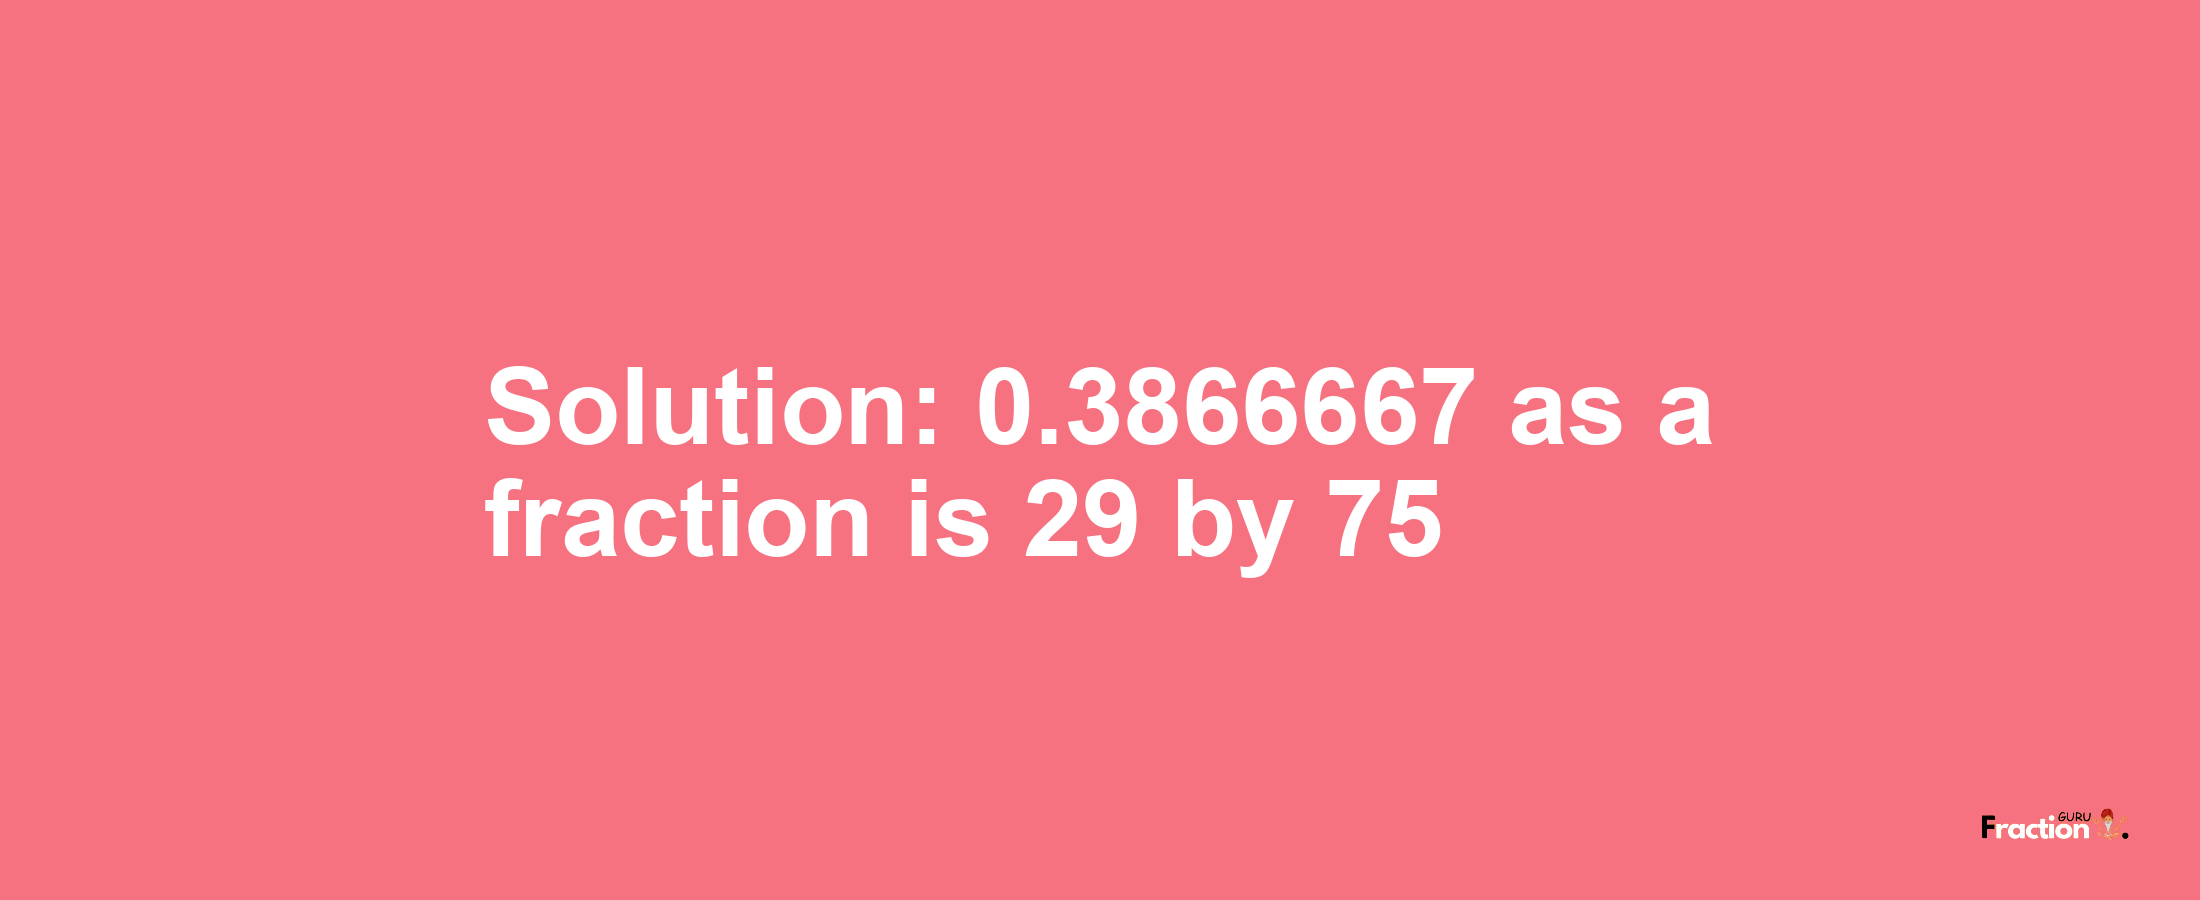 Solution:0.3866667 as a fraction is 29/75